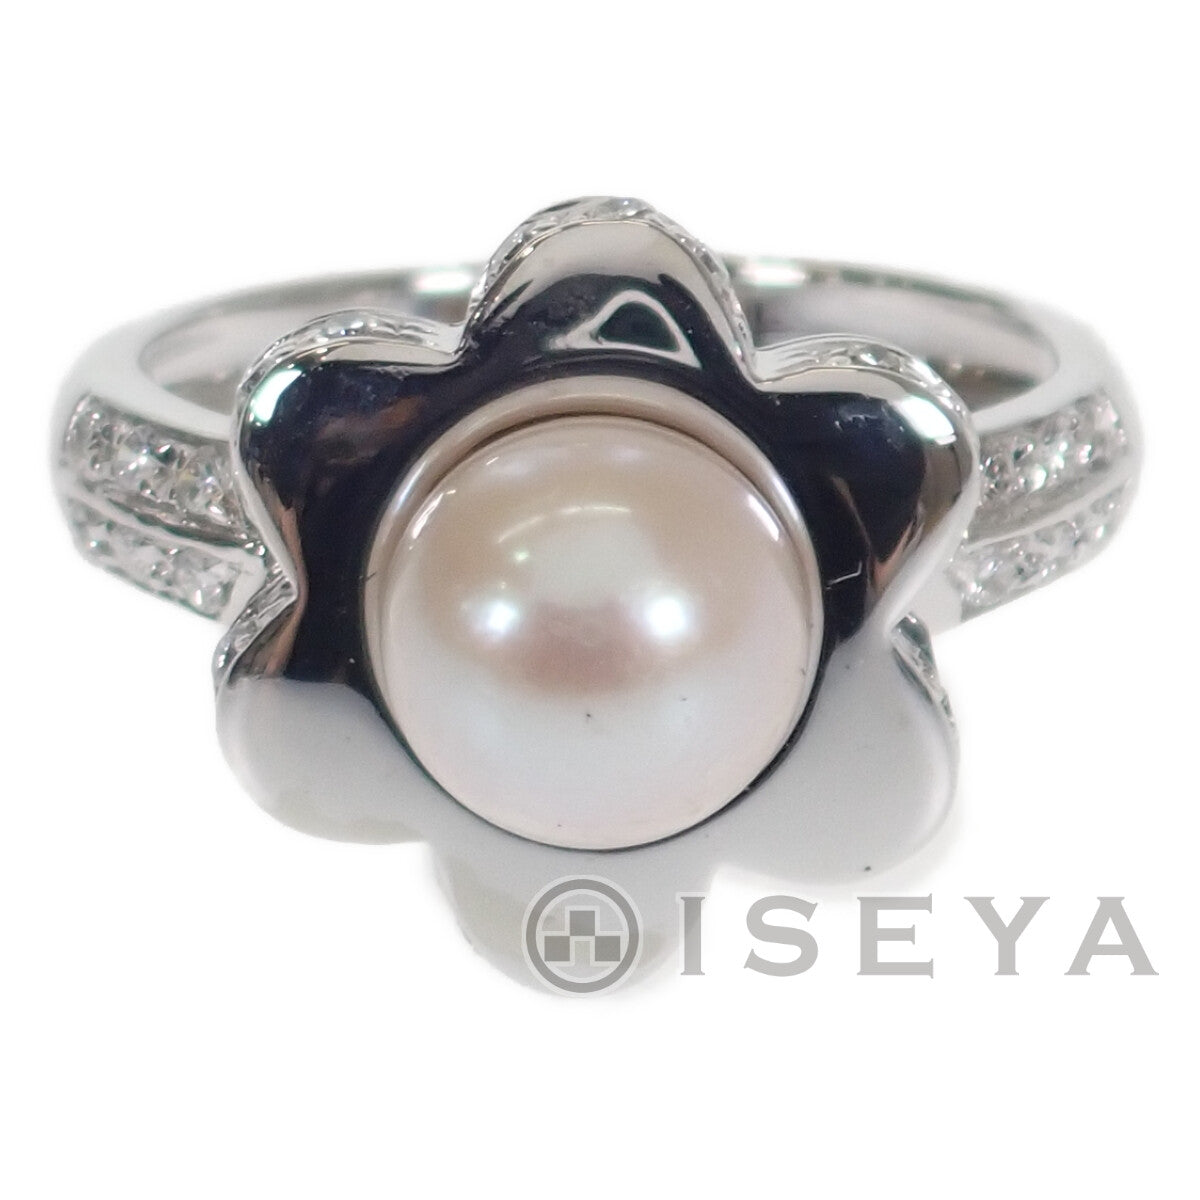 [LuxUness]  Ponte Vecchio Flower Motif Ring with Pearl & Diamond in K18 White Gold for Women, Size 9 (Used) in Excellent condition